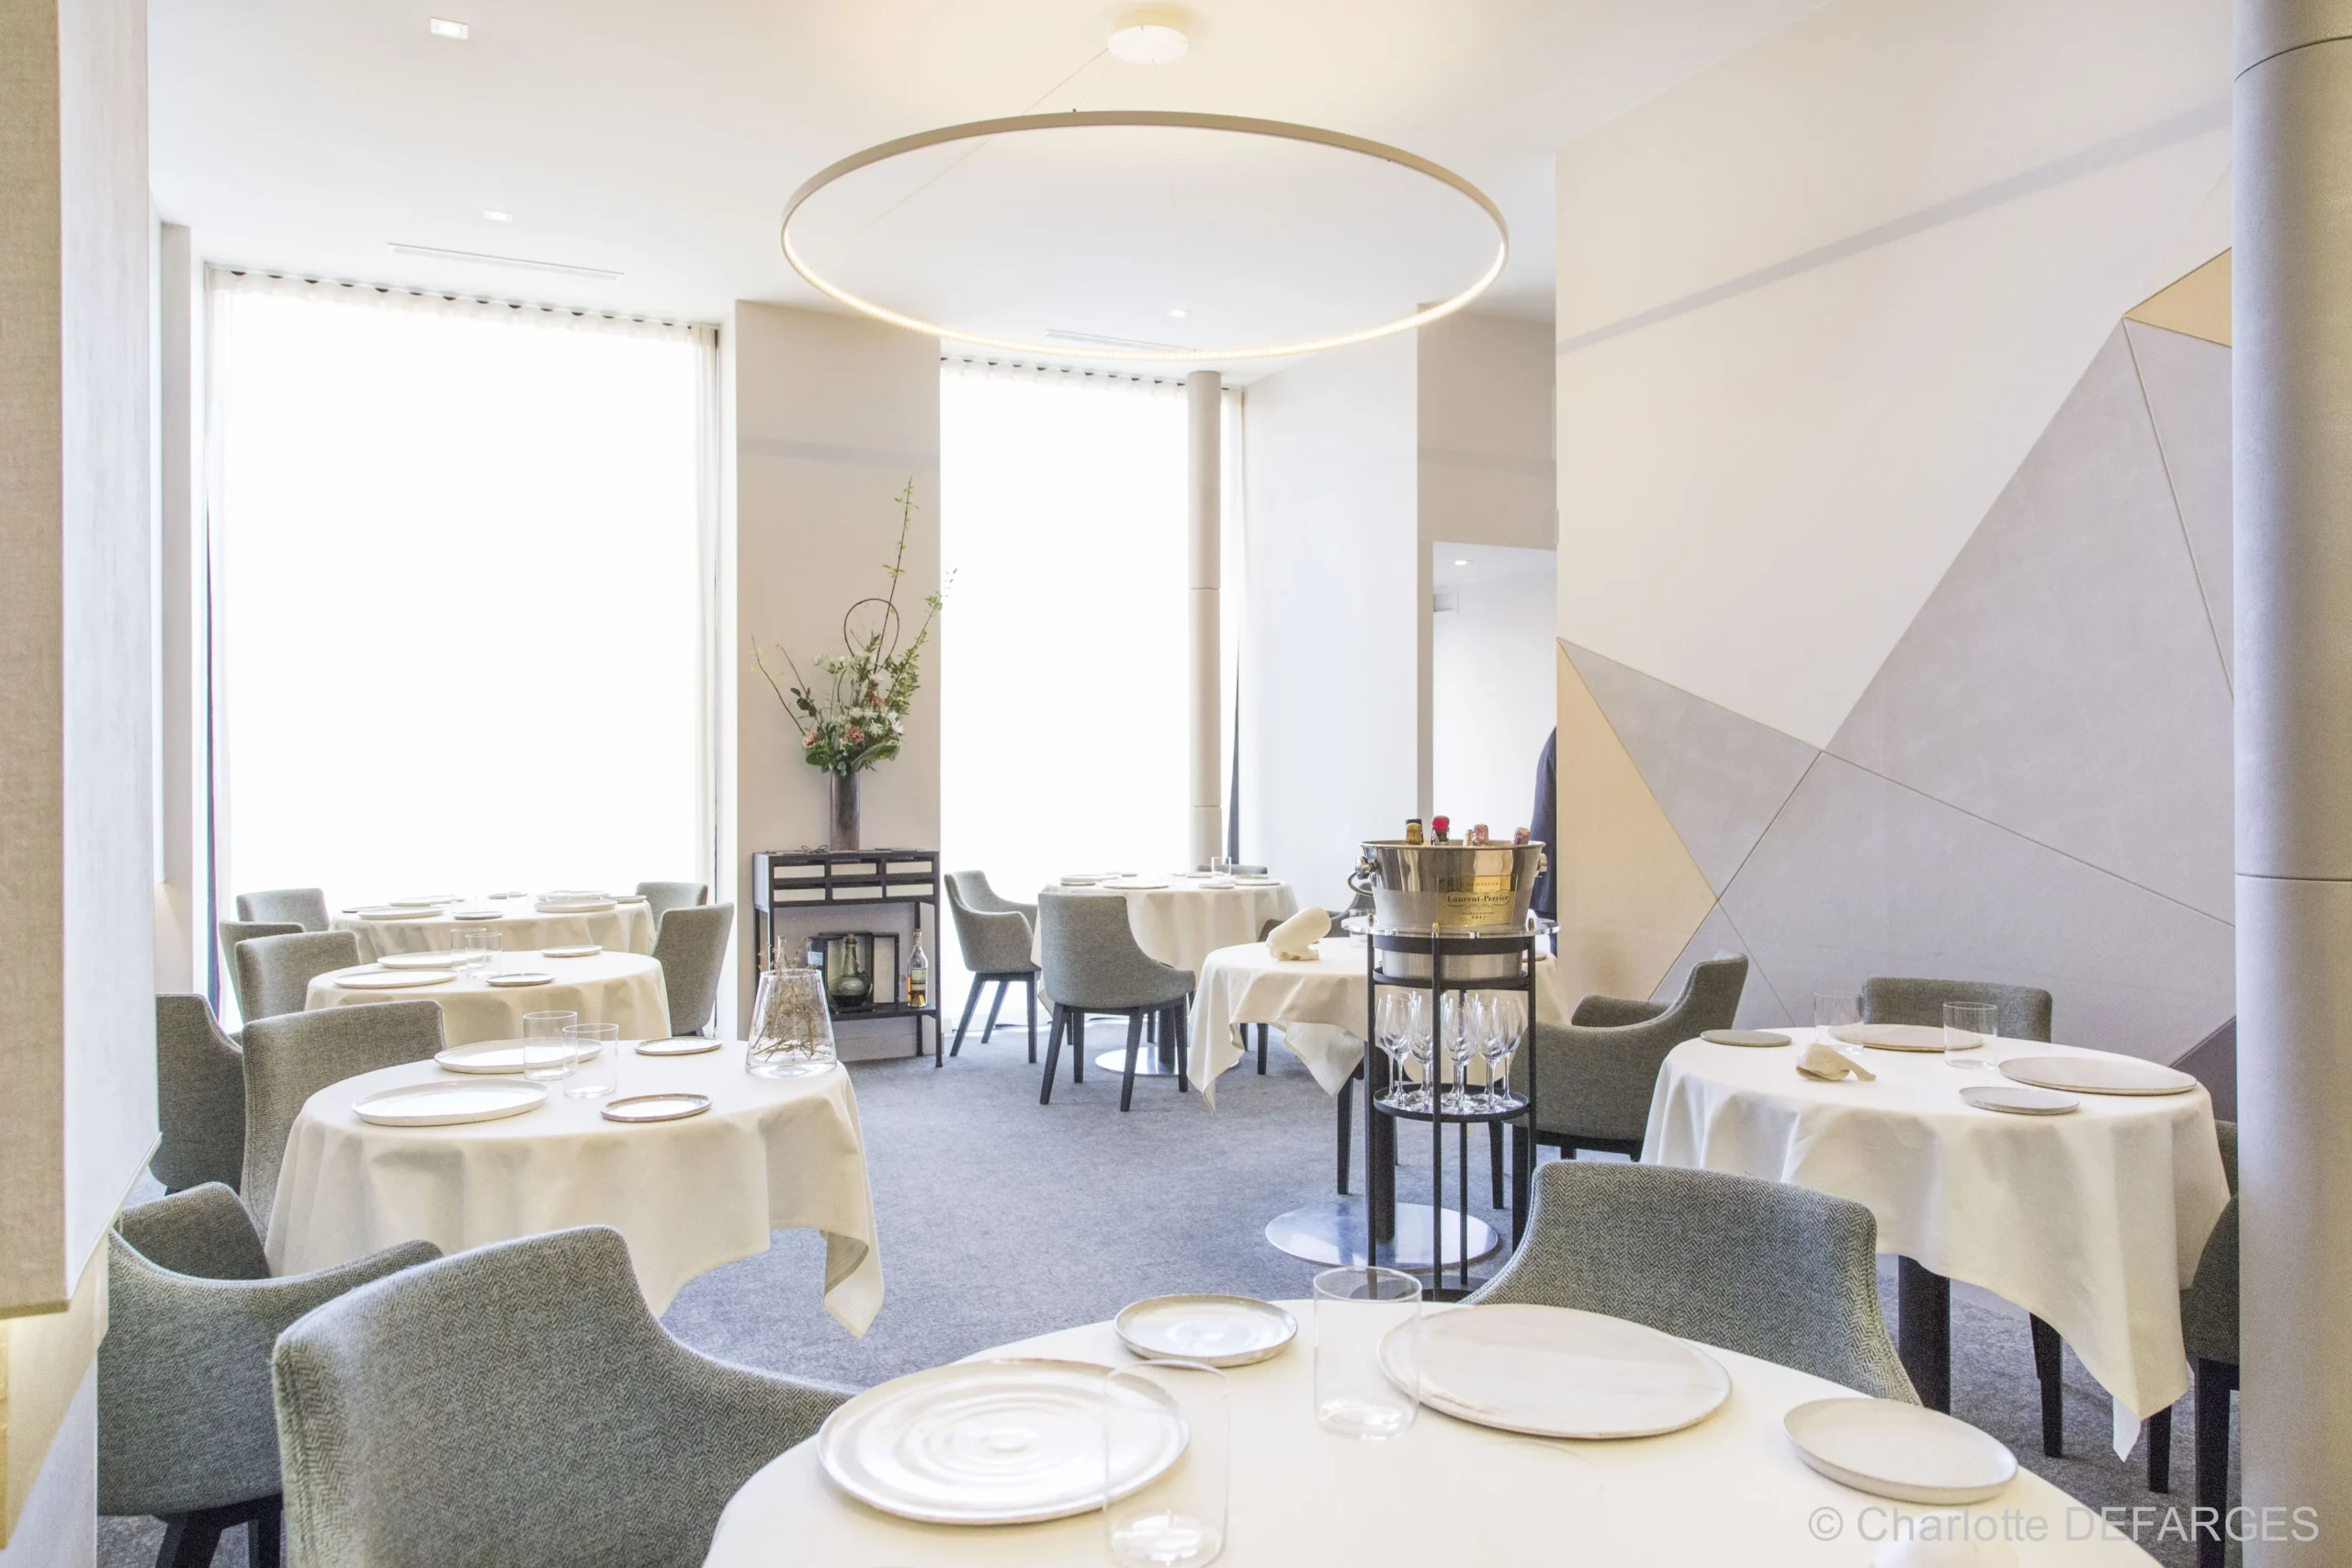 The serene and stylish dining room of Alliance Paris, known for being one of the most affordable Michelin Star restaurants in Paris, bathed in natural light with a modern and airy decor, ready to welcome diners to a luxurious yet accessible experience.